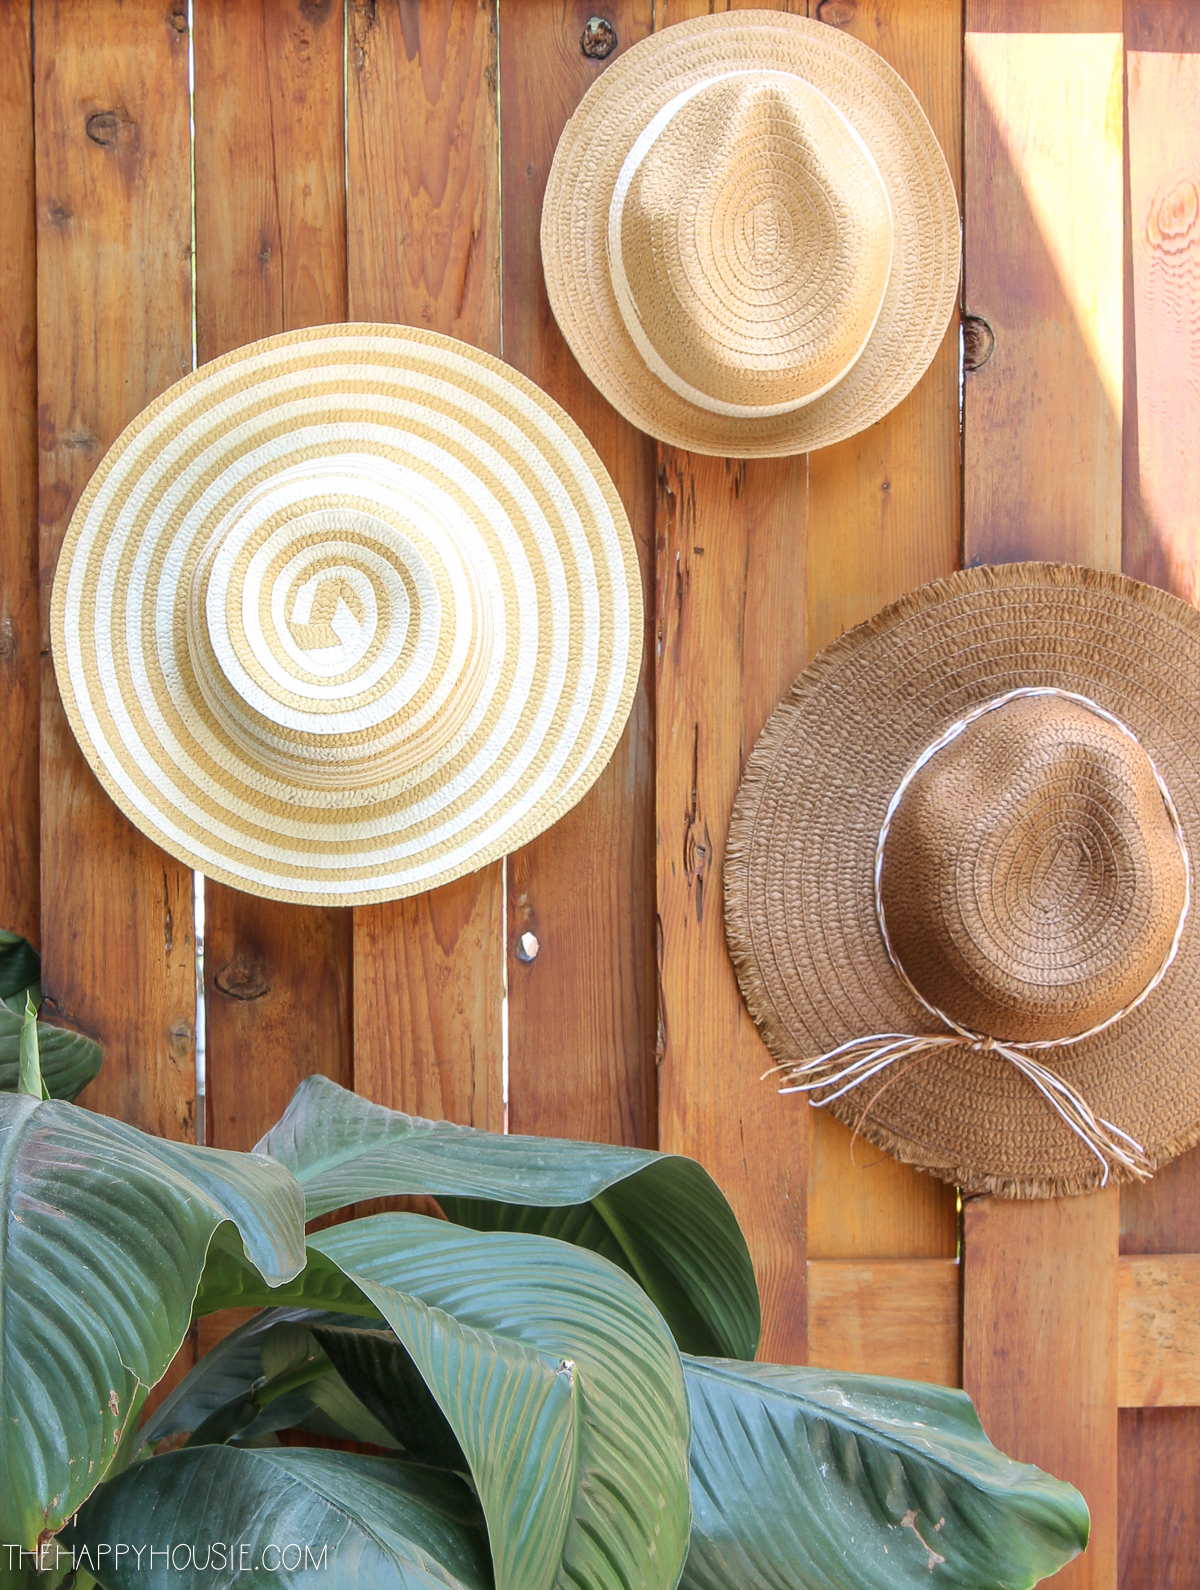 Straw hats on the fence.